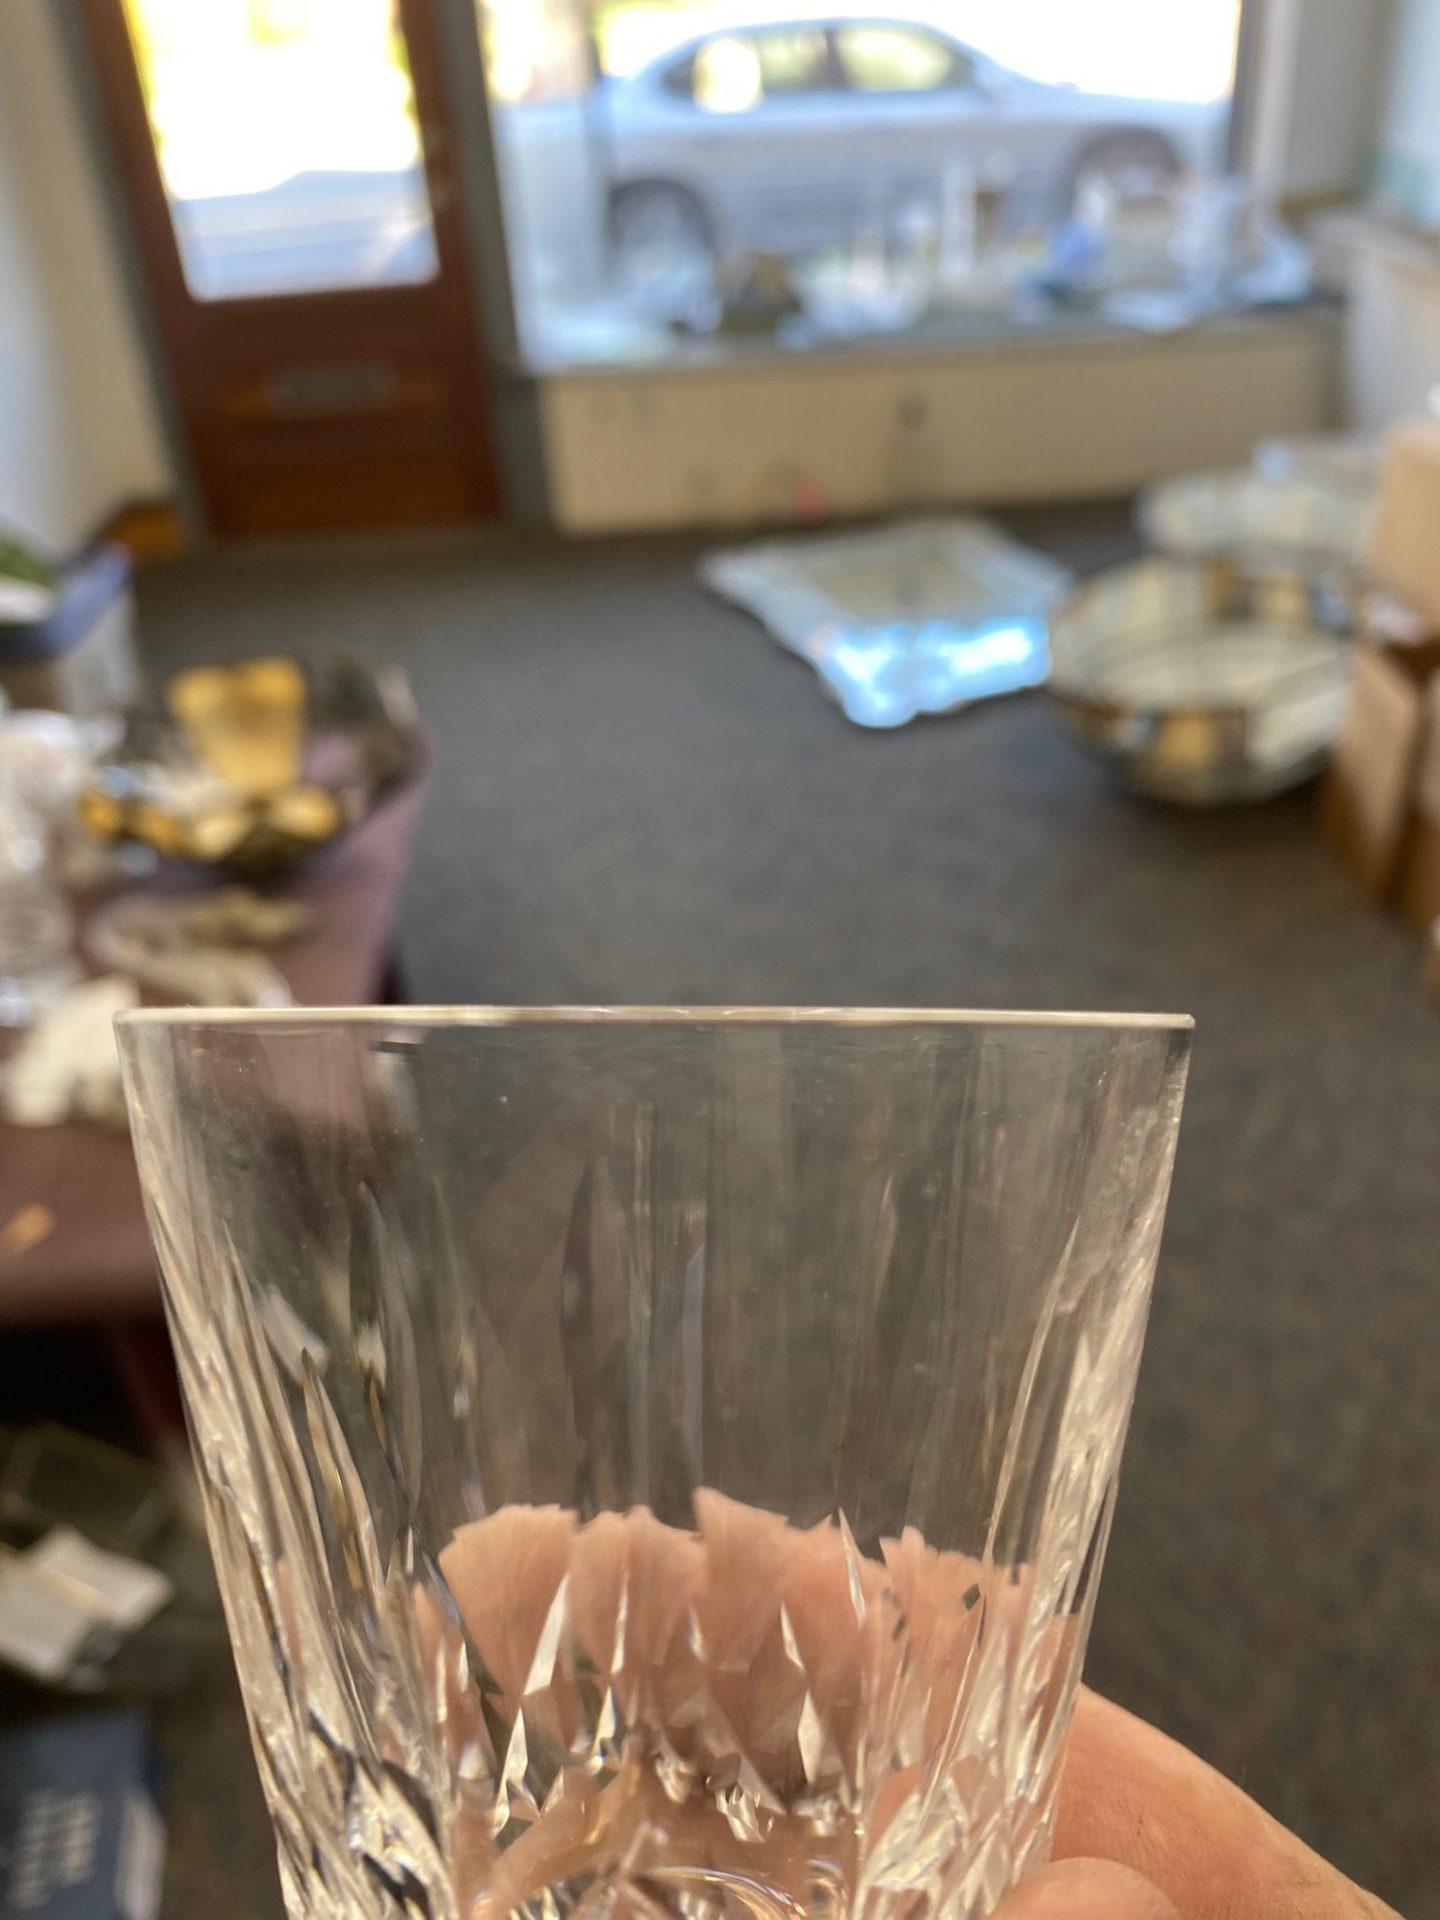 CHIPPED CRYSTAL WINE GLASS REPAIR - repaired